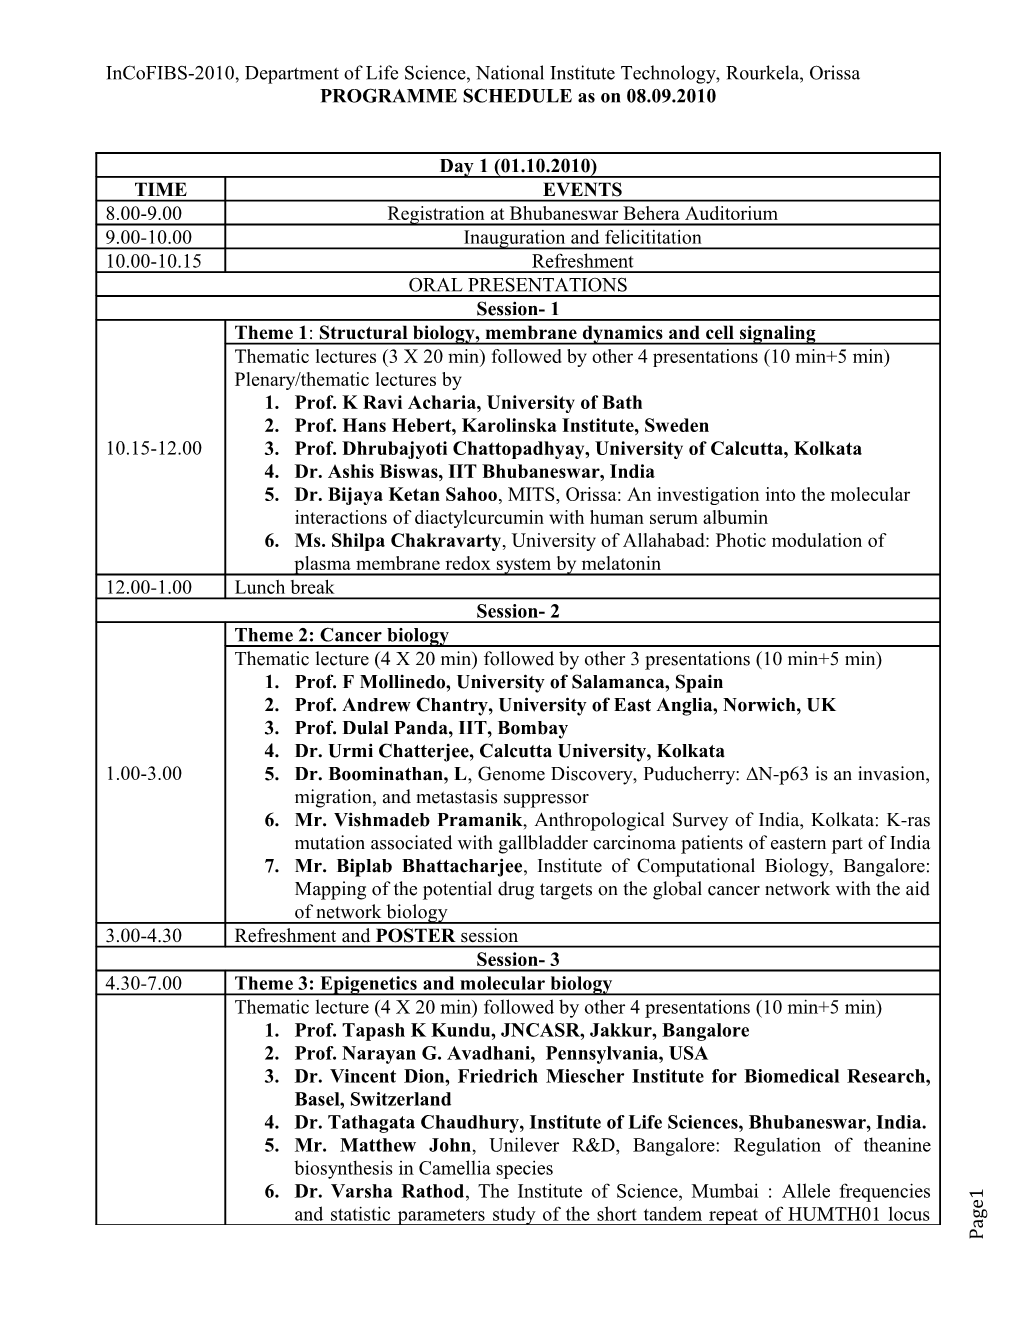 PROGRAMME SCHEDULE As on 08.09.2010